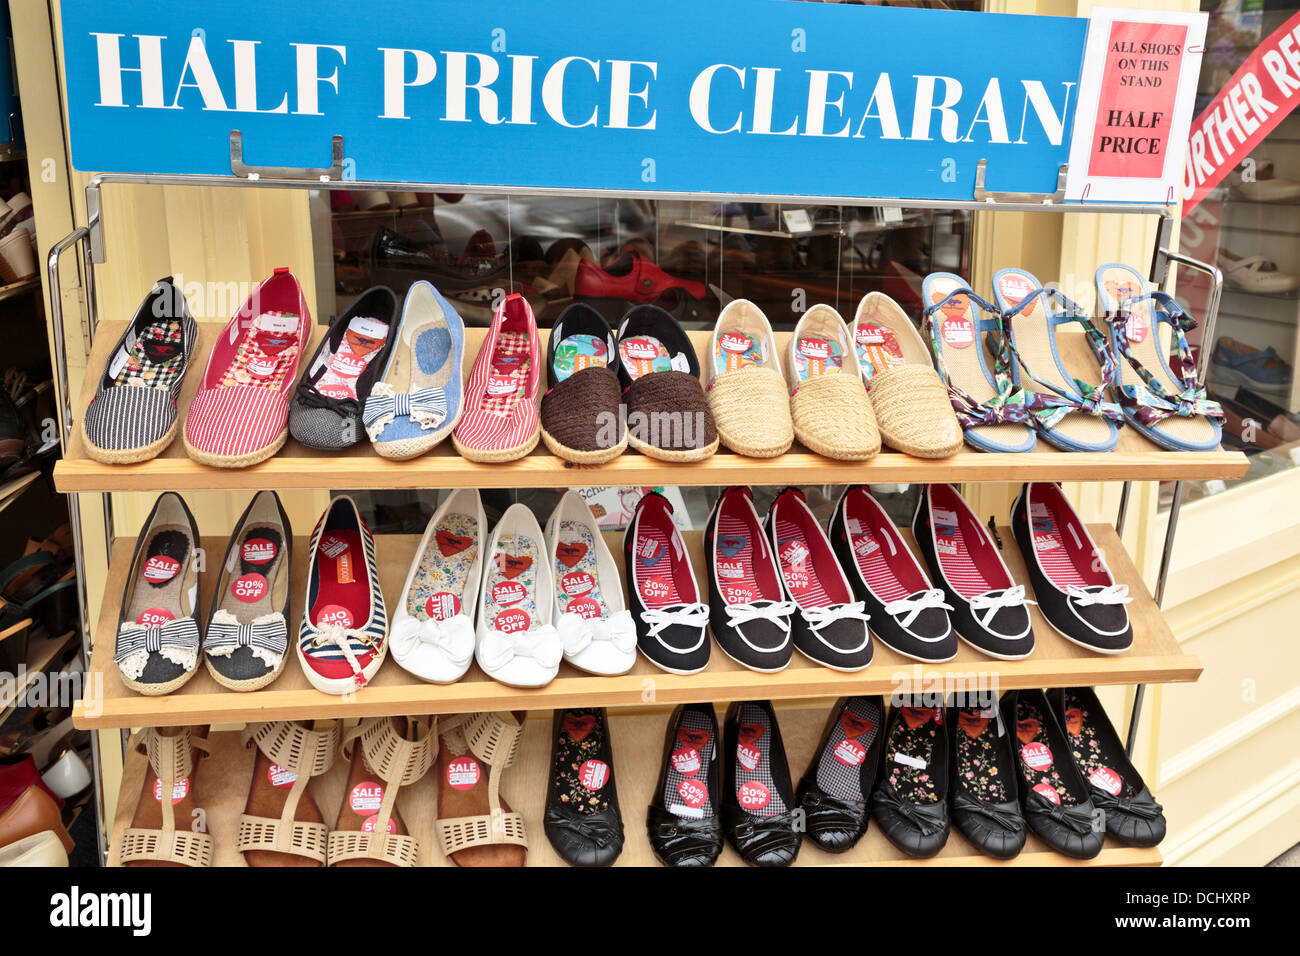 Shoes at clearance sale price in front 